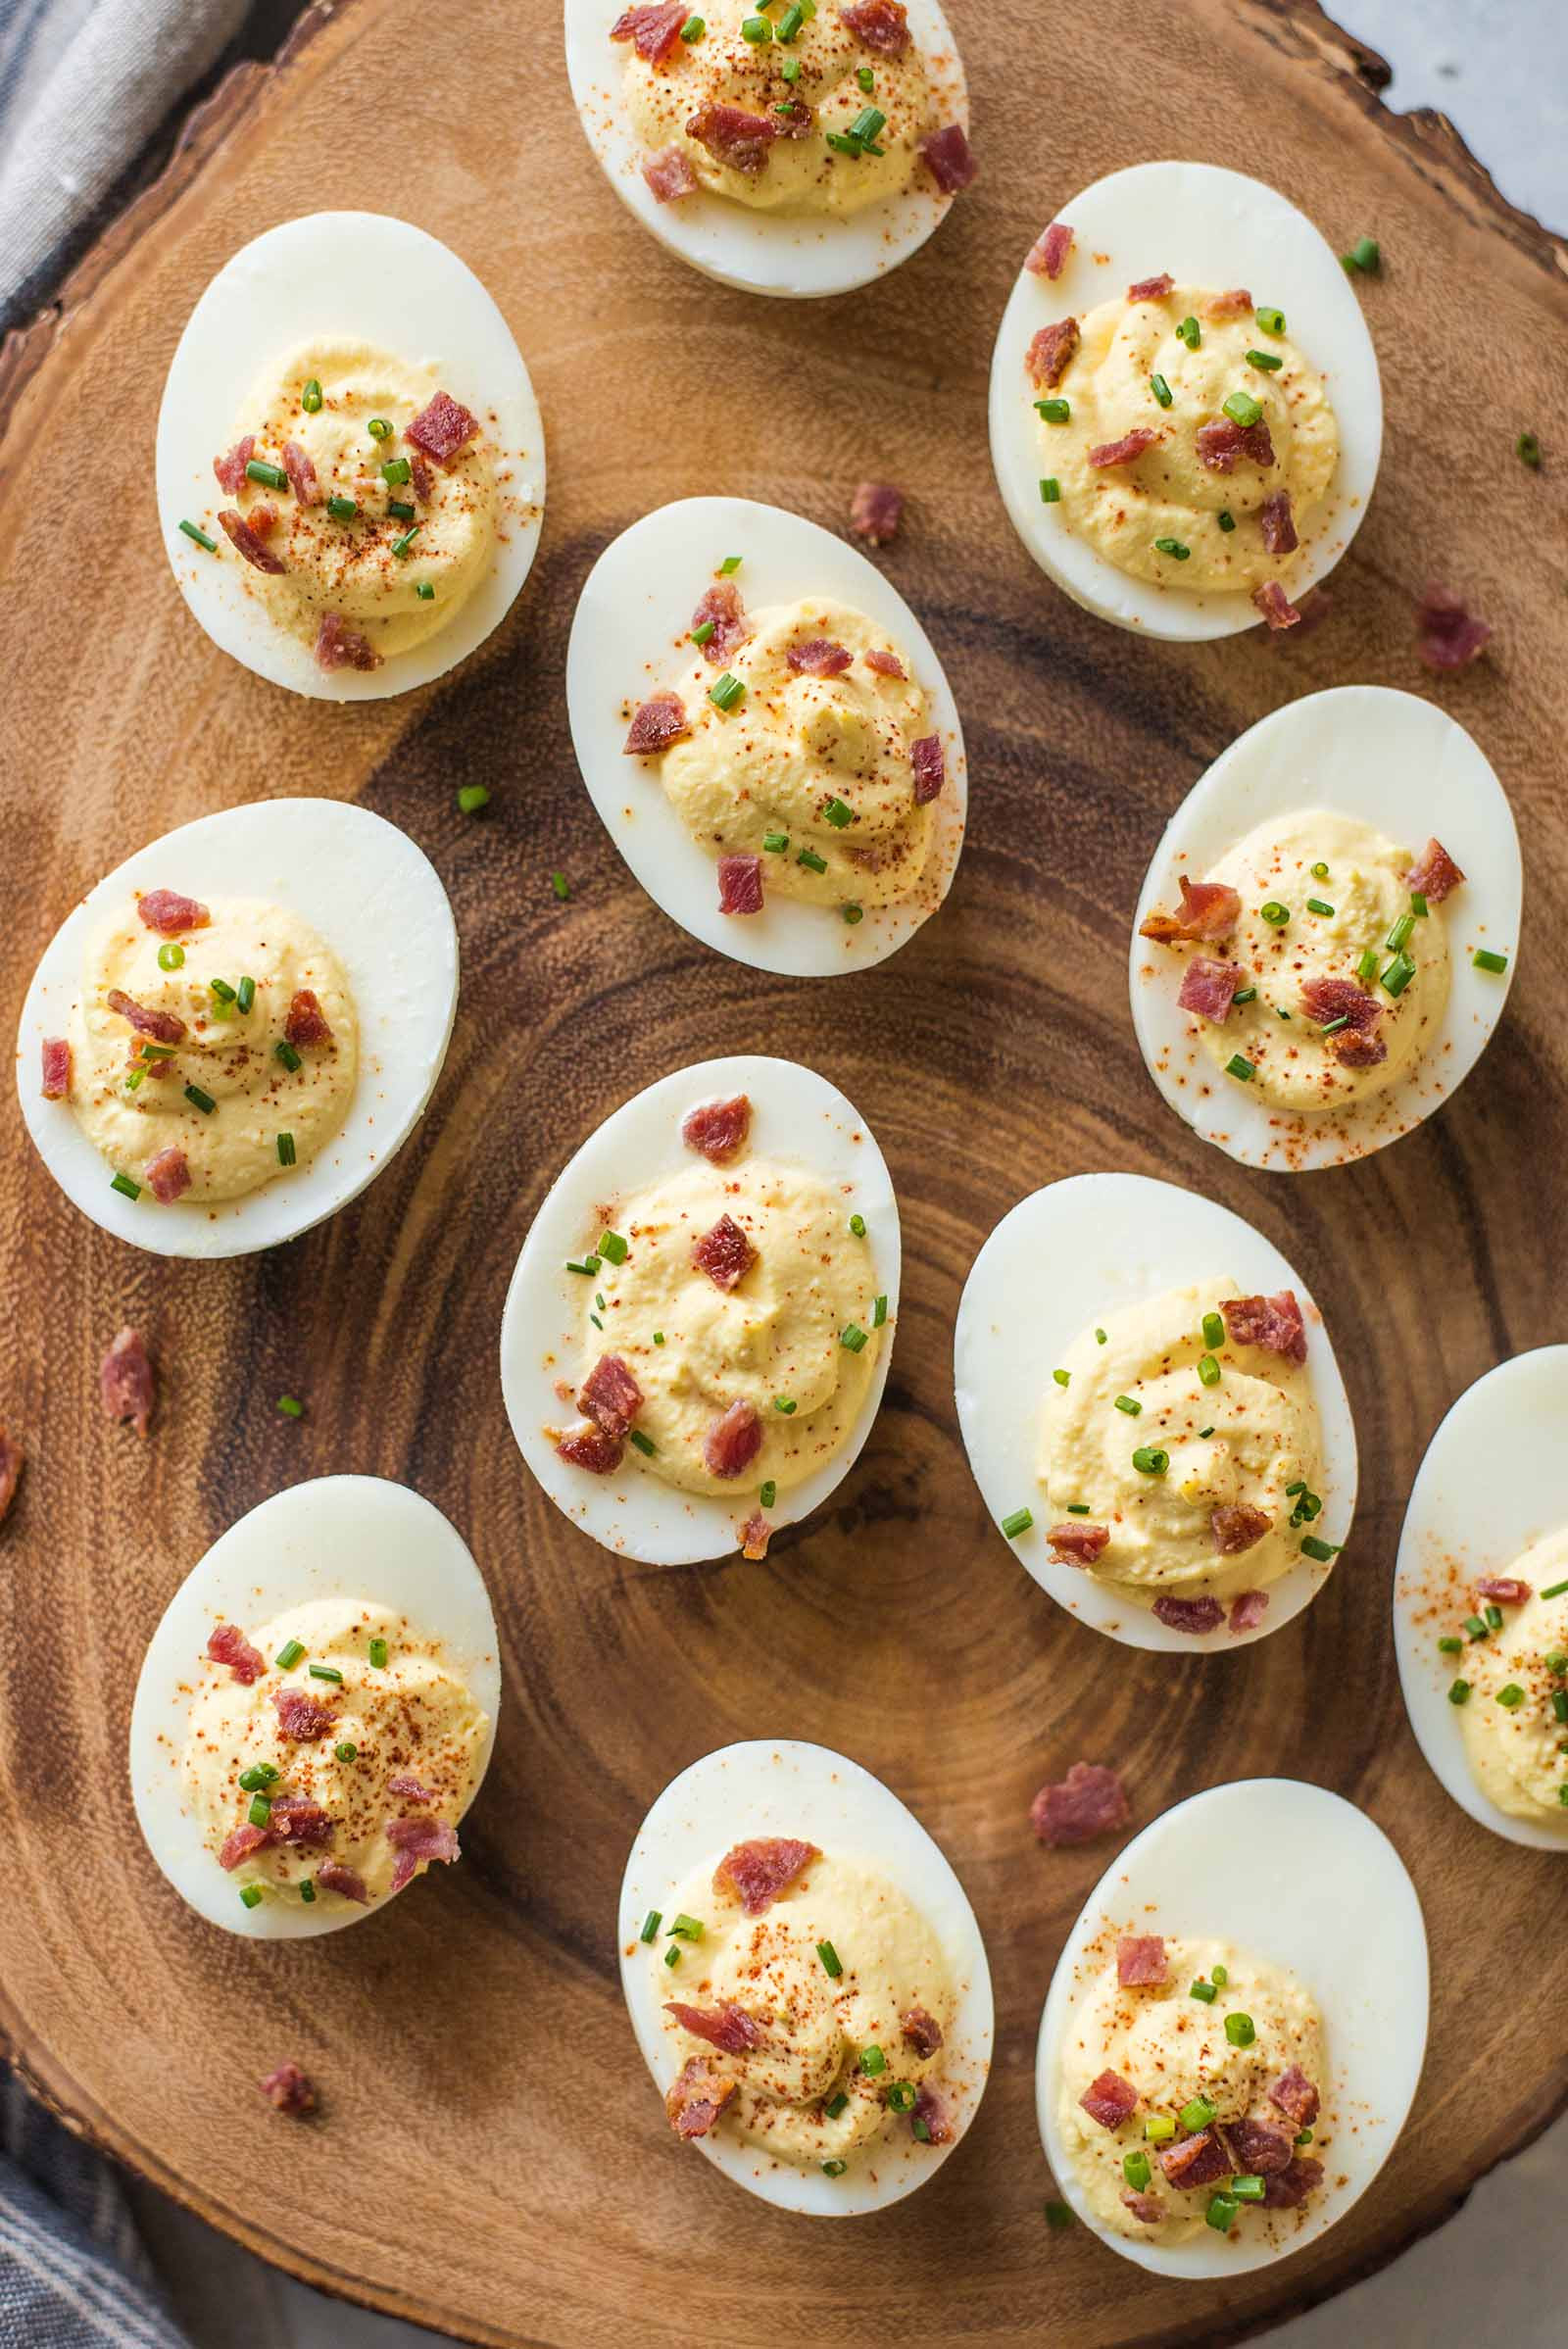 Deviled Eggs Recipe With Bacon
 Sour Cream and Bacon Deviled Eggs Recipe